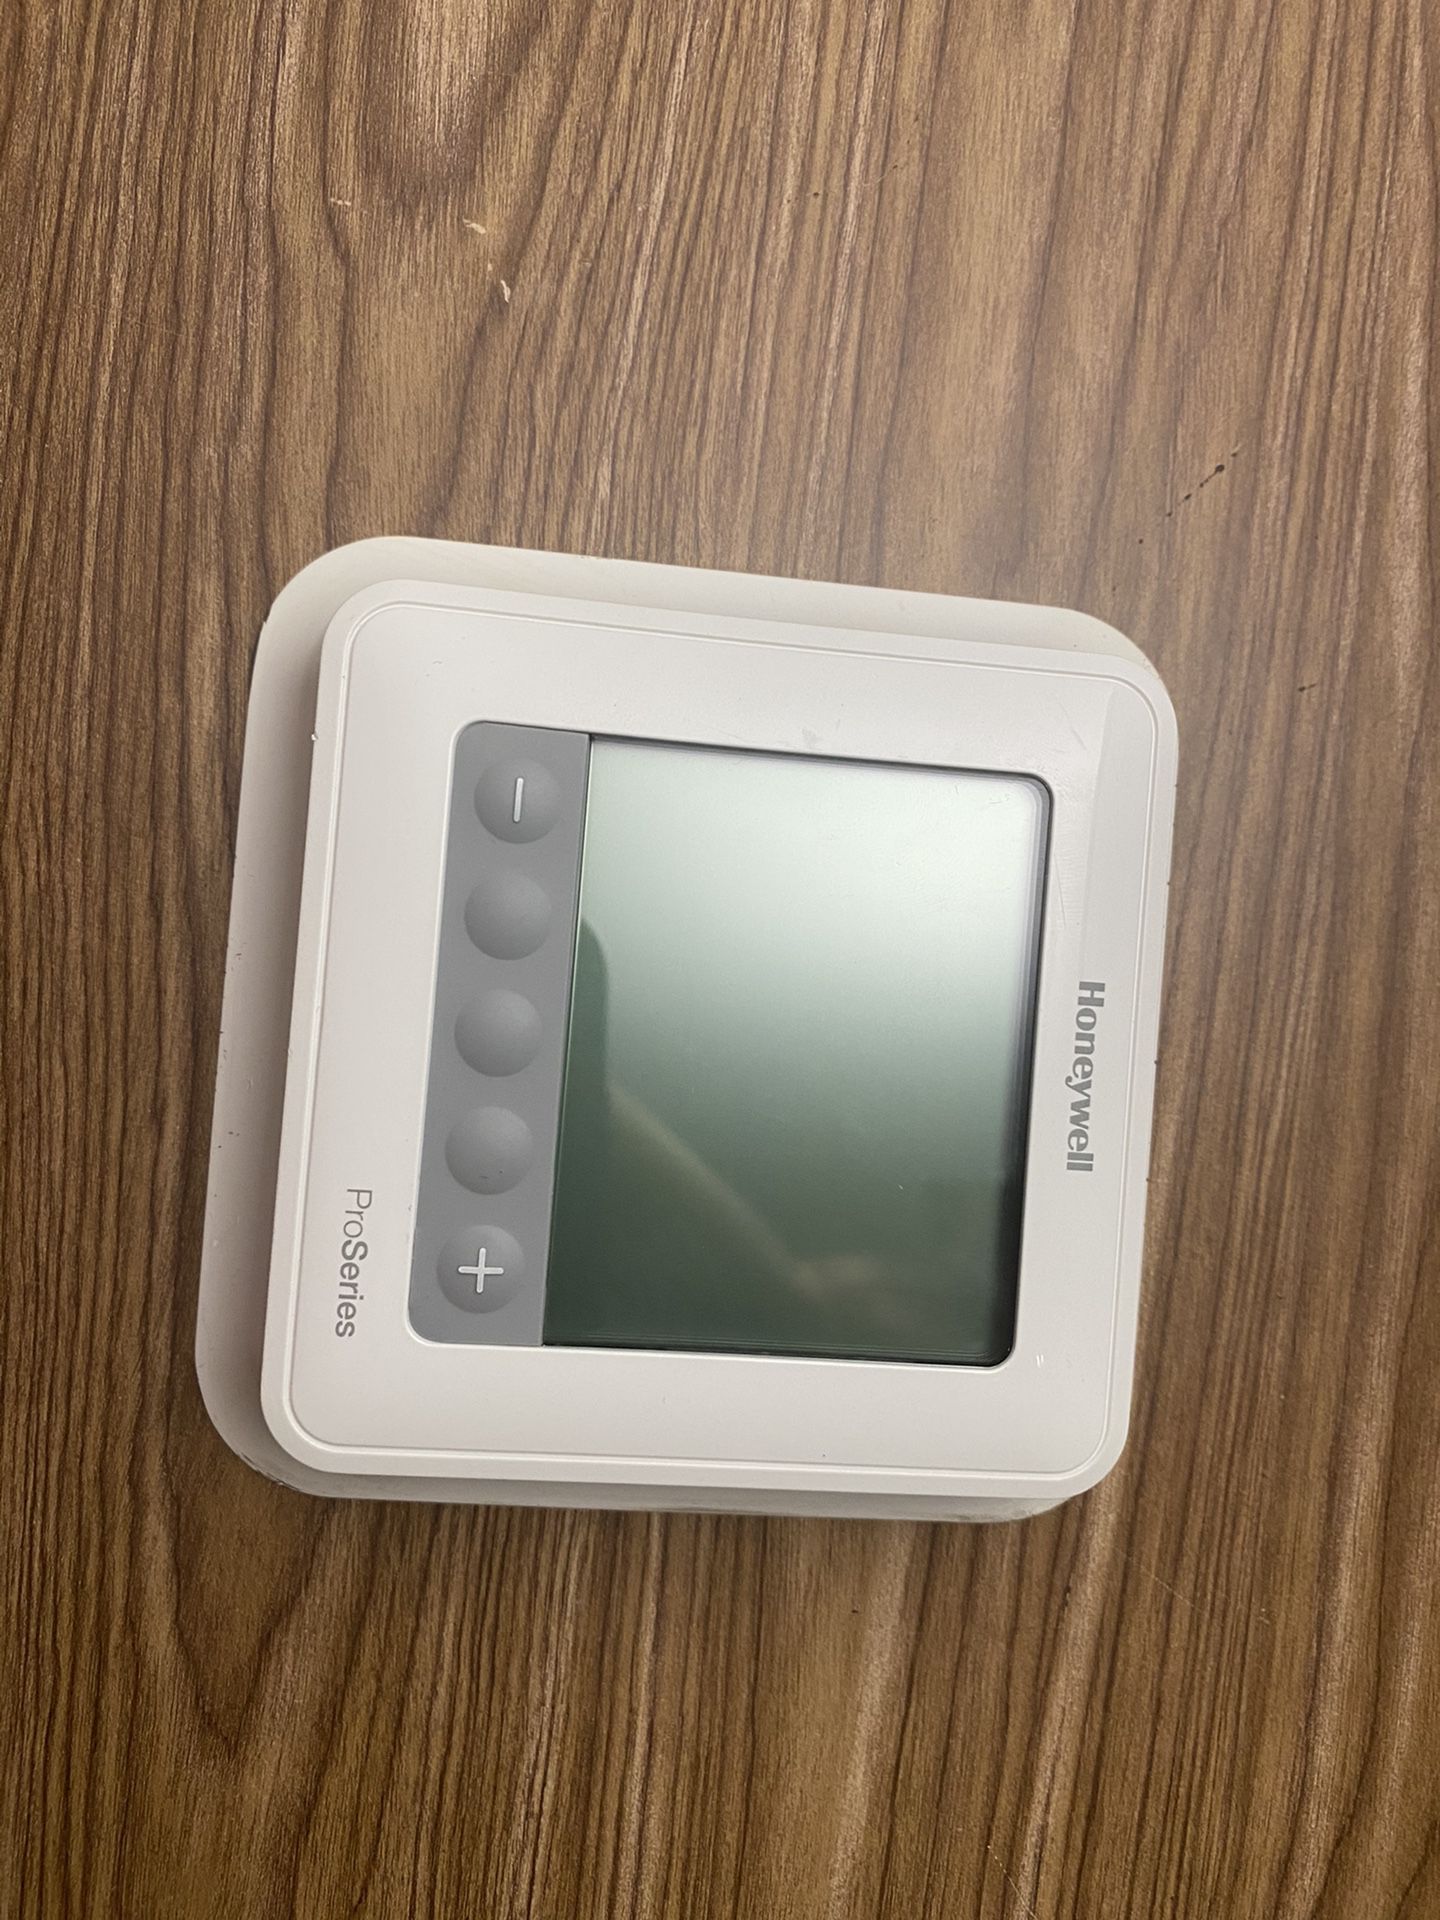 Honeywell T6 pro programmable Thermostats